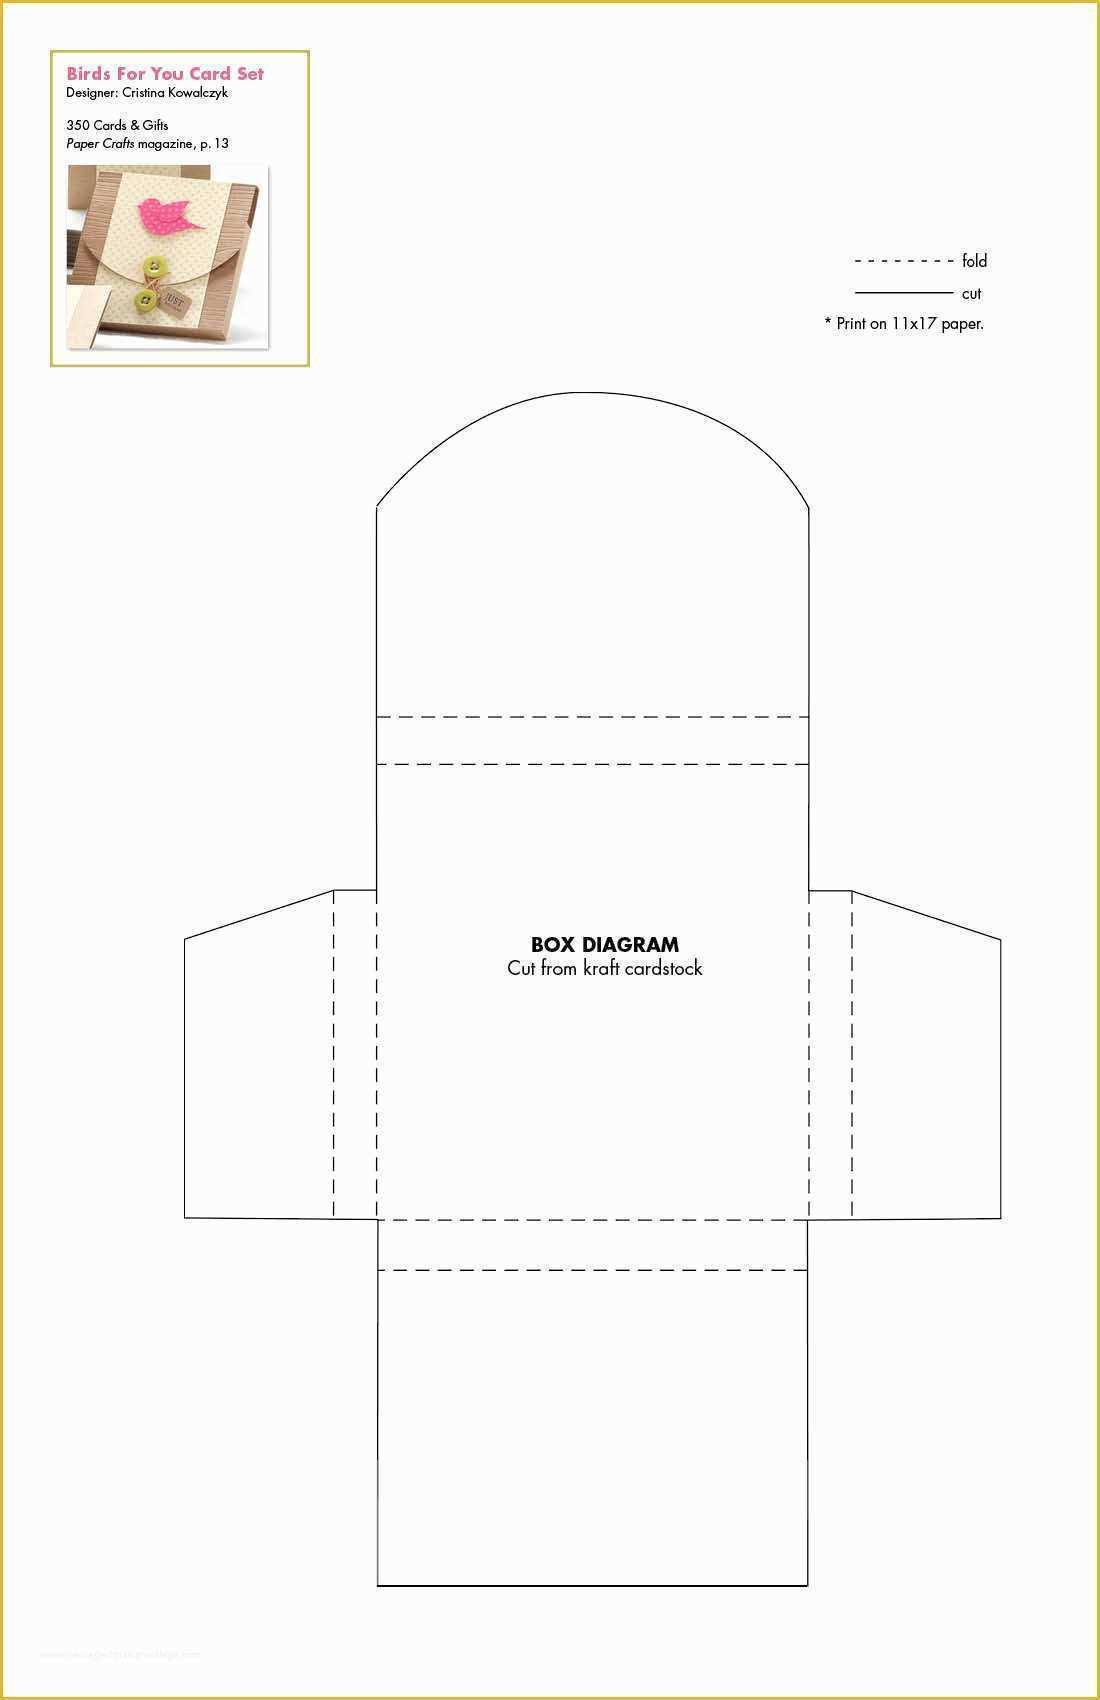 032 Gift Card Envelope Template Free Of Patterns Birds Cards Pertaining To Envelope Templates For Card Making